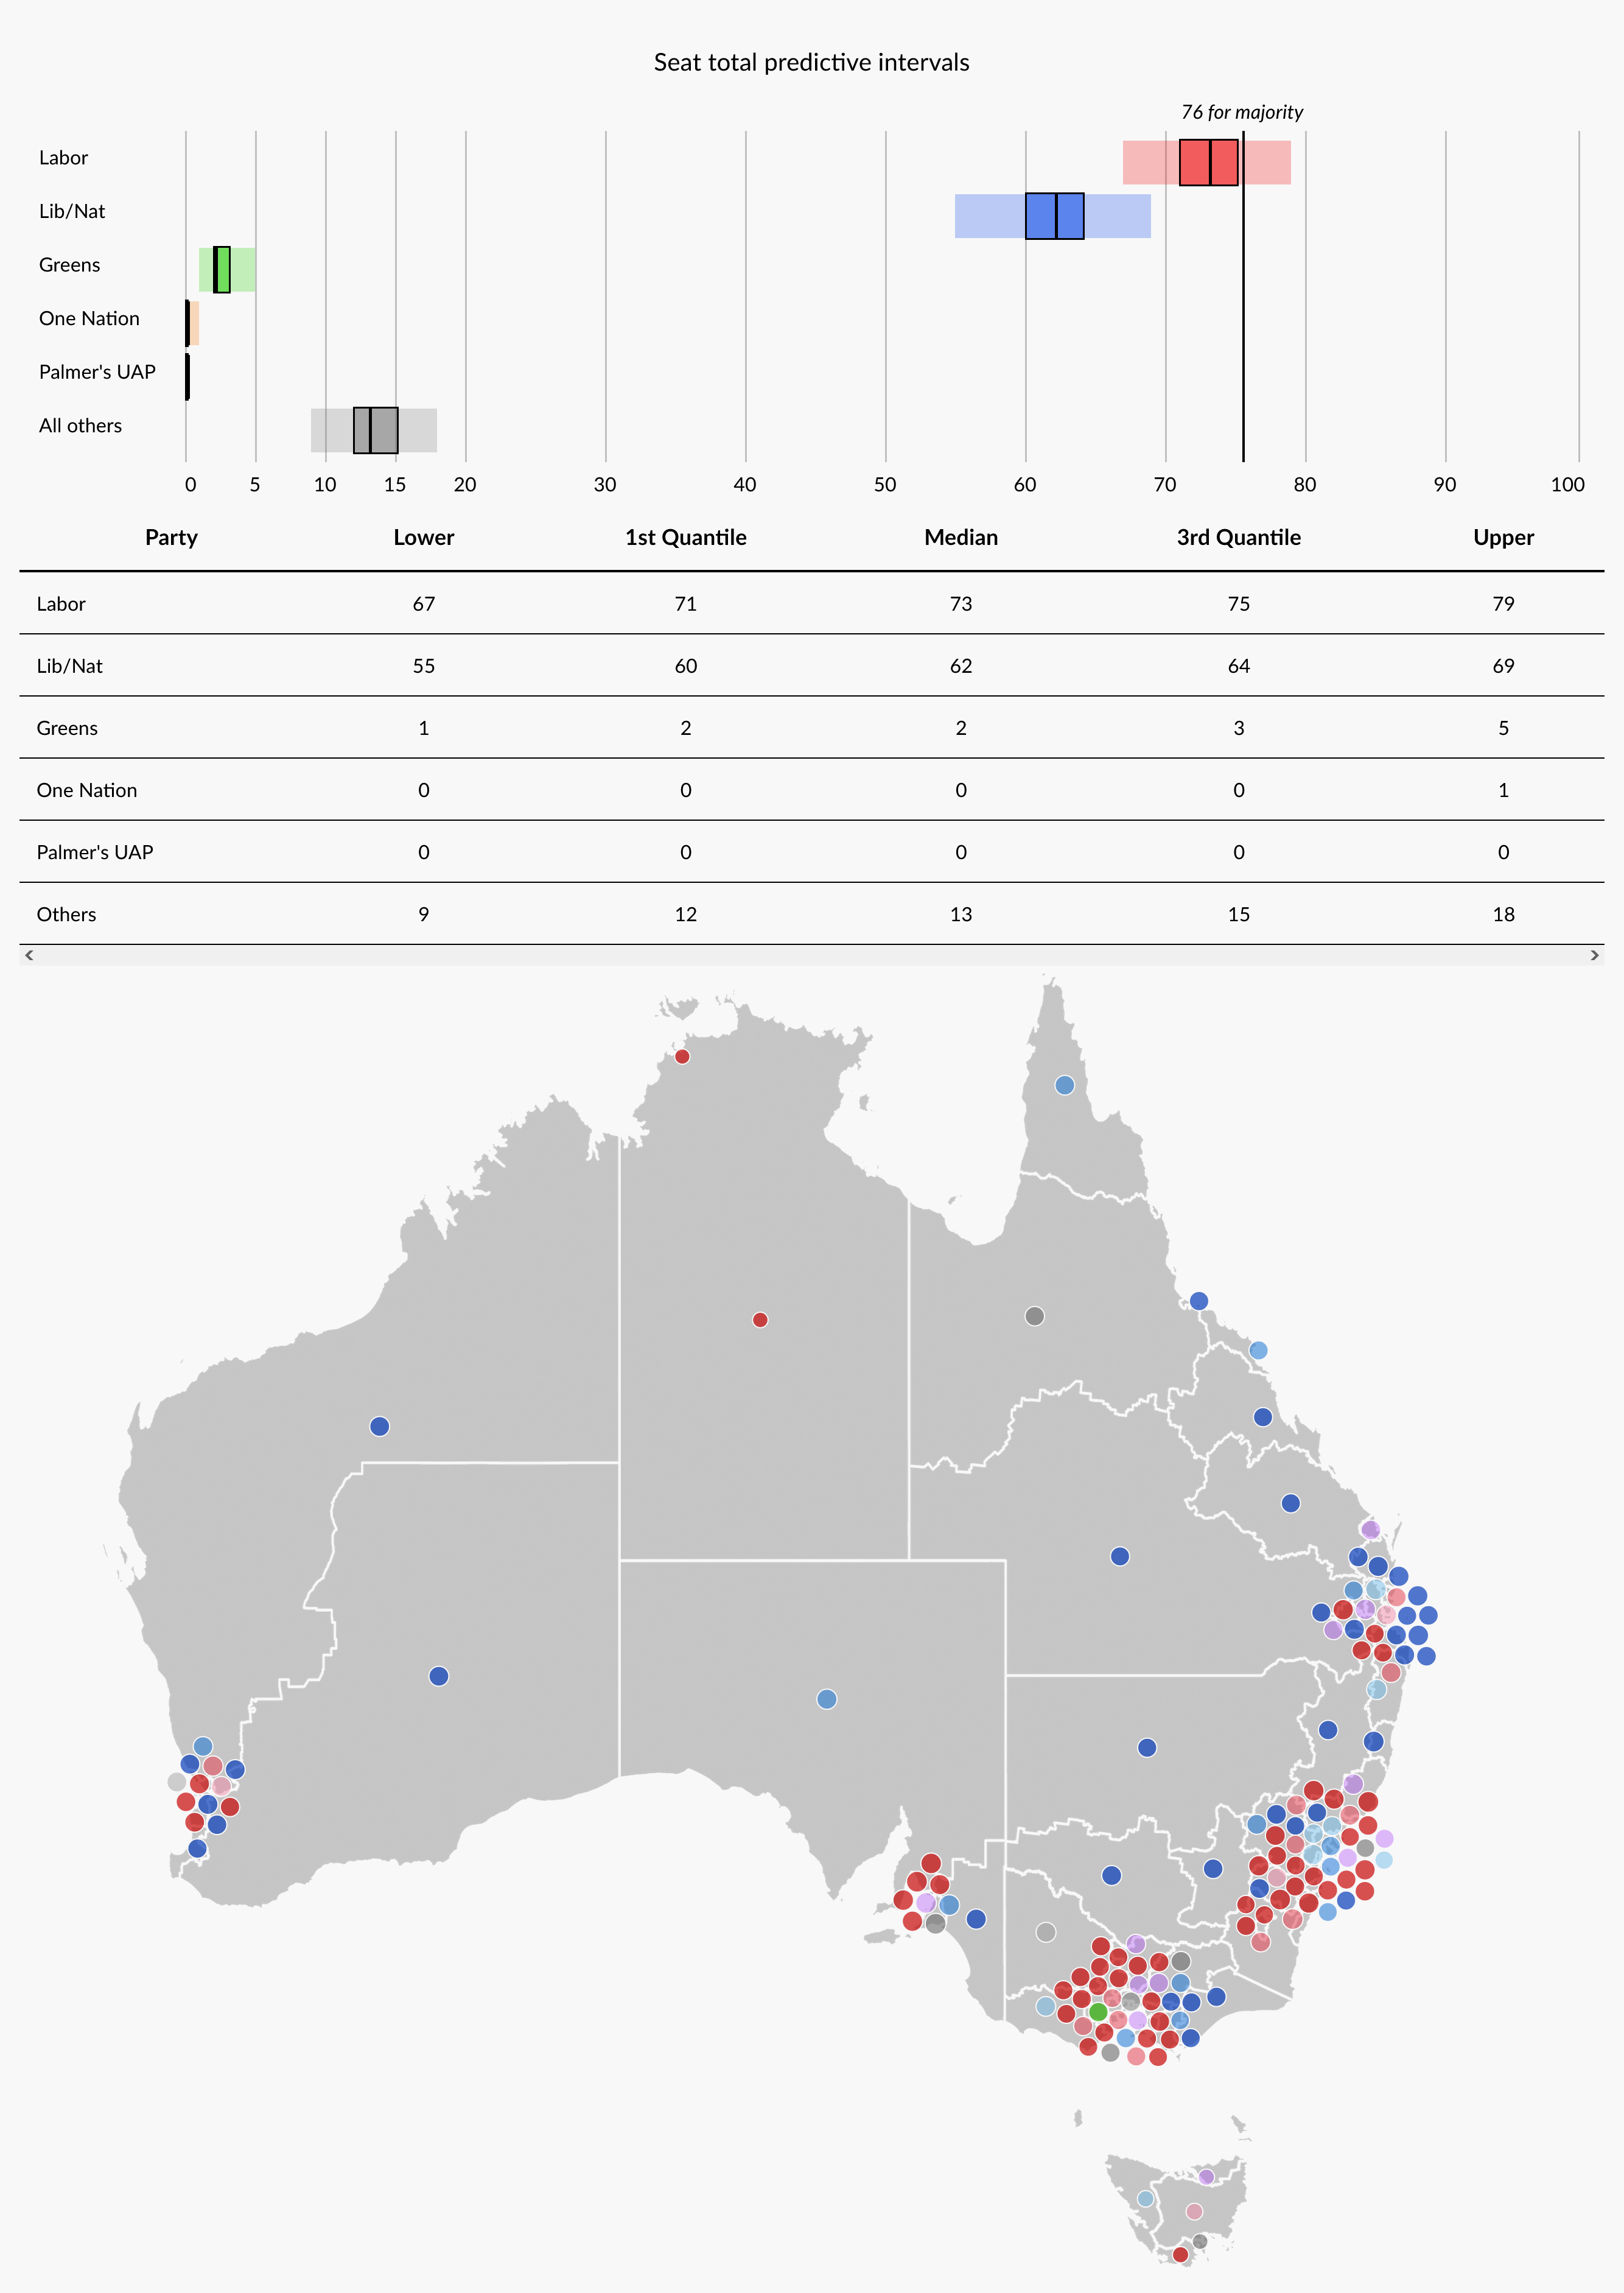 Simulated electoral map if Labor wins 51 on 2pp basis, with major-party-vote declining to 67